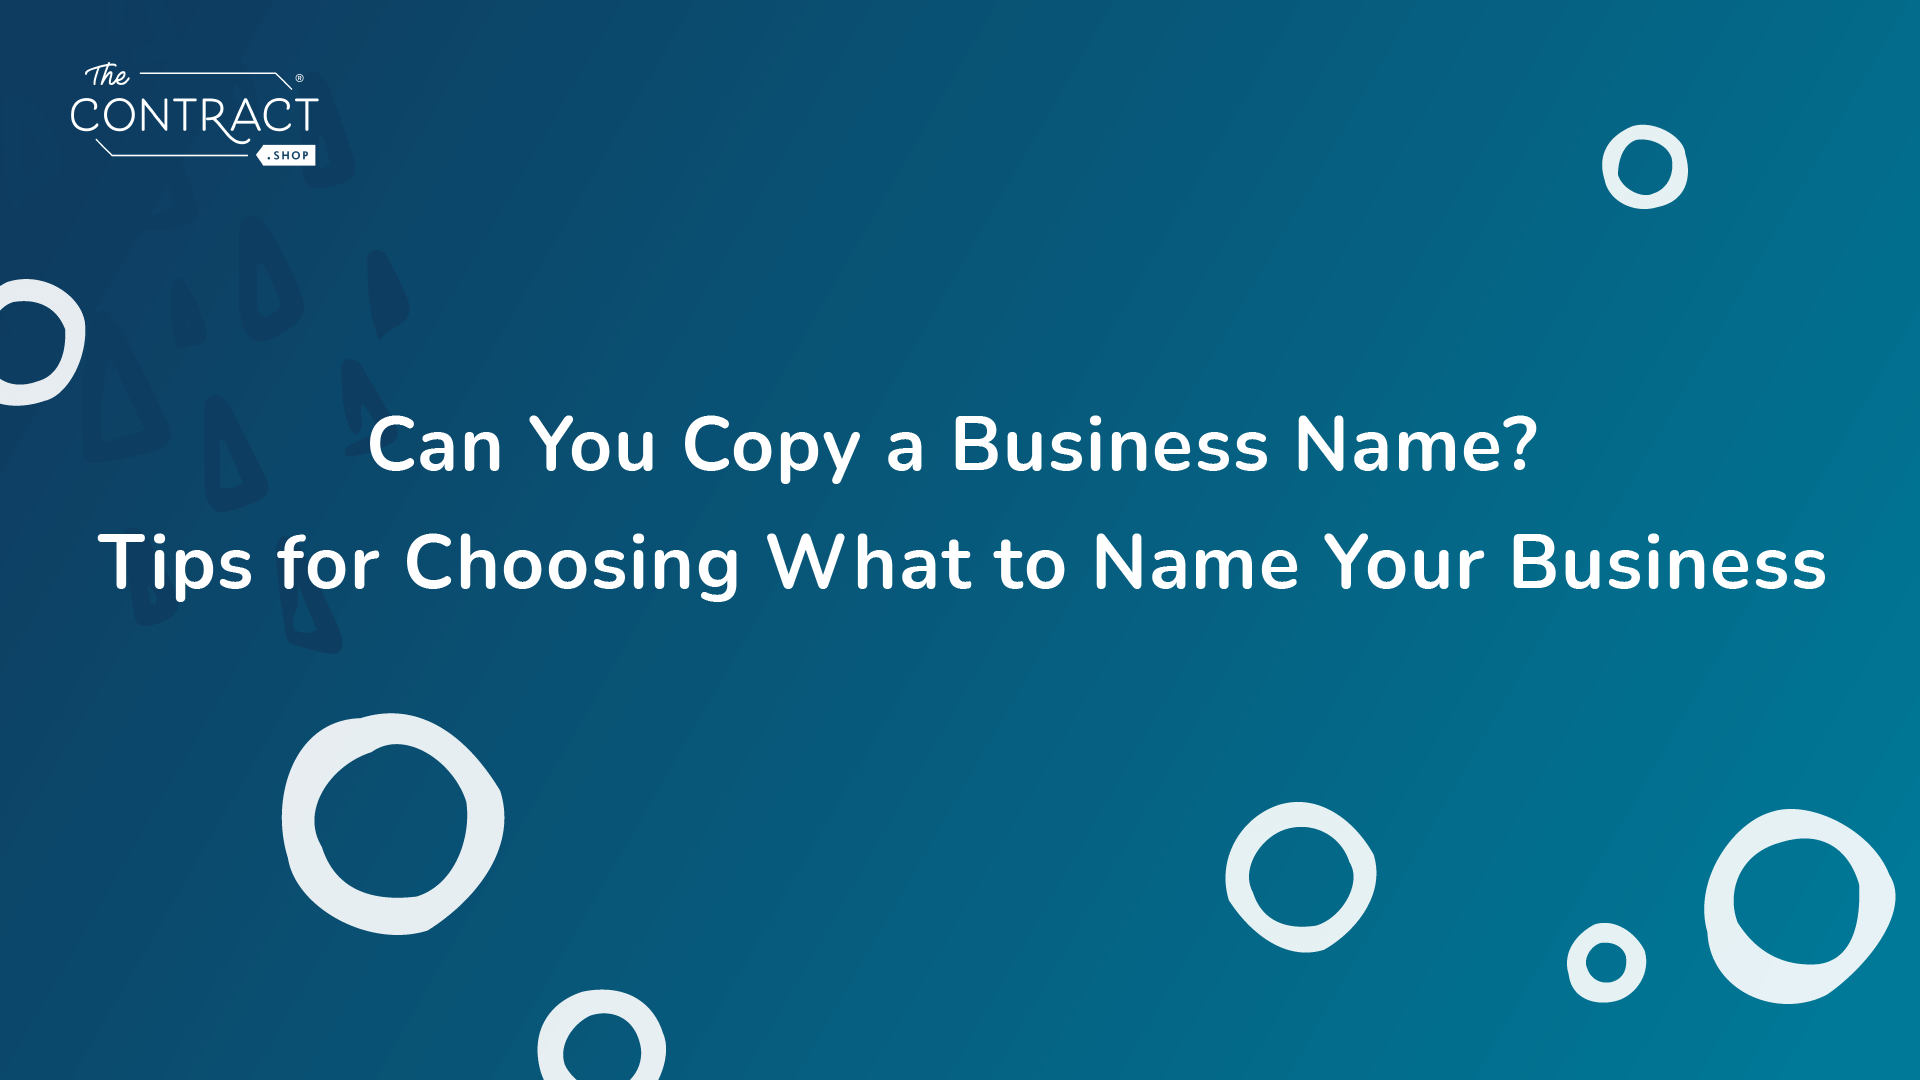 Can You Copy a Business Name?